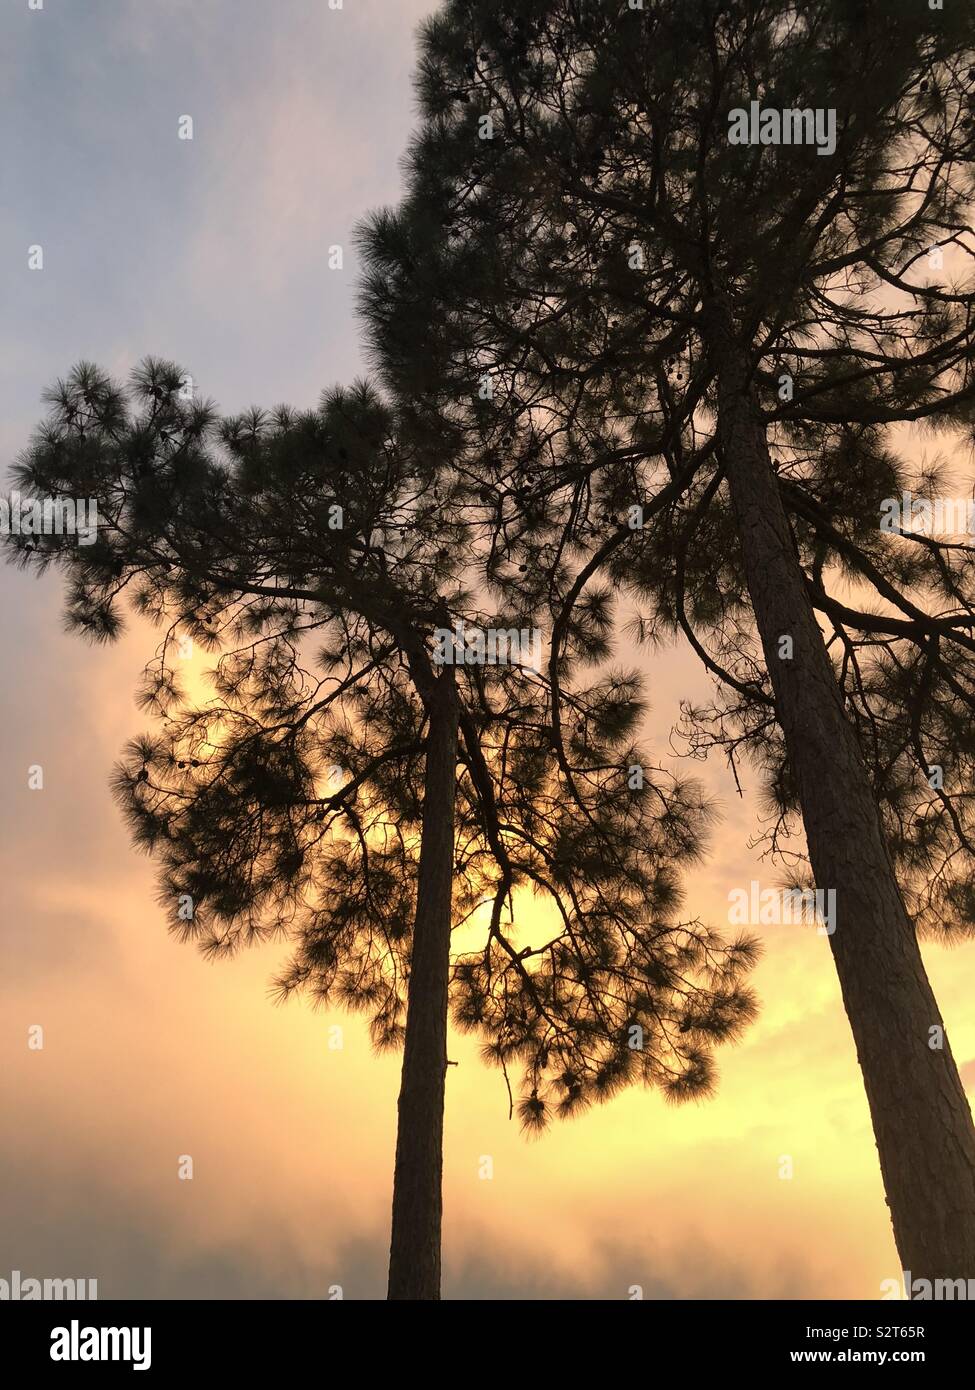 Bright sunset skies with pine tree silhouettes Stock Photo